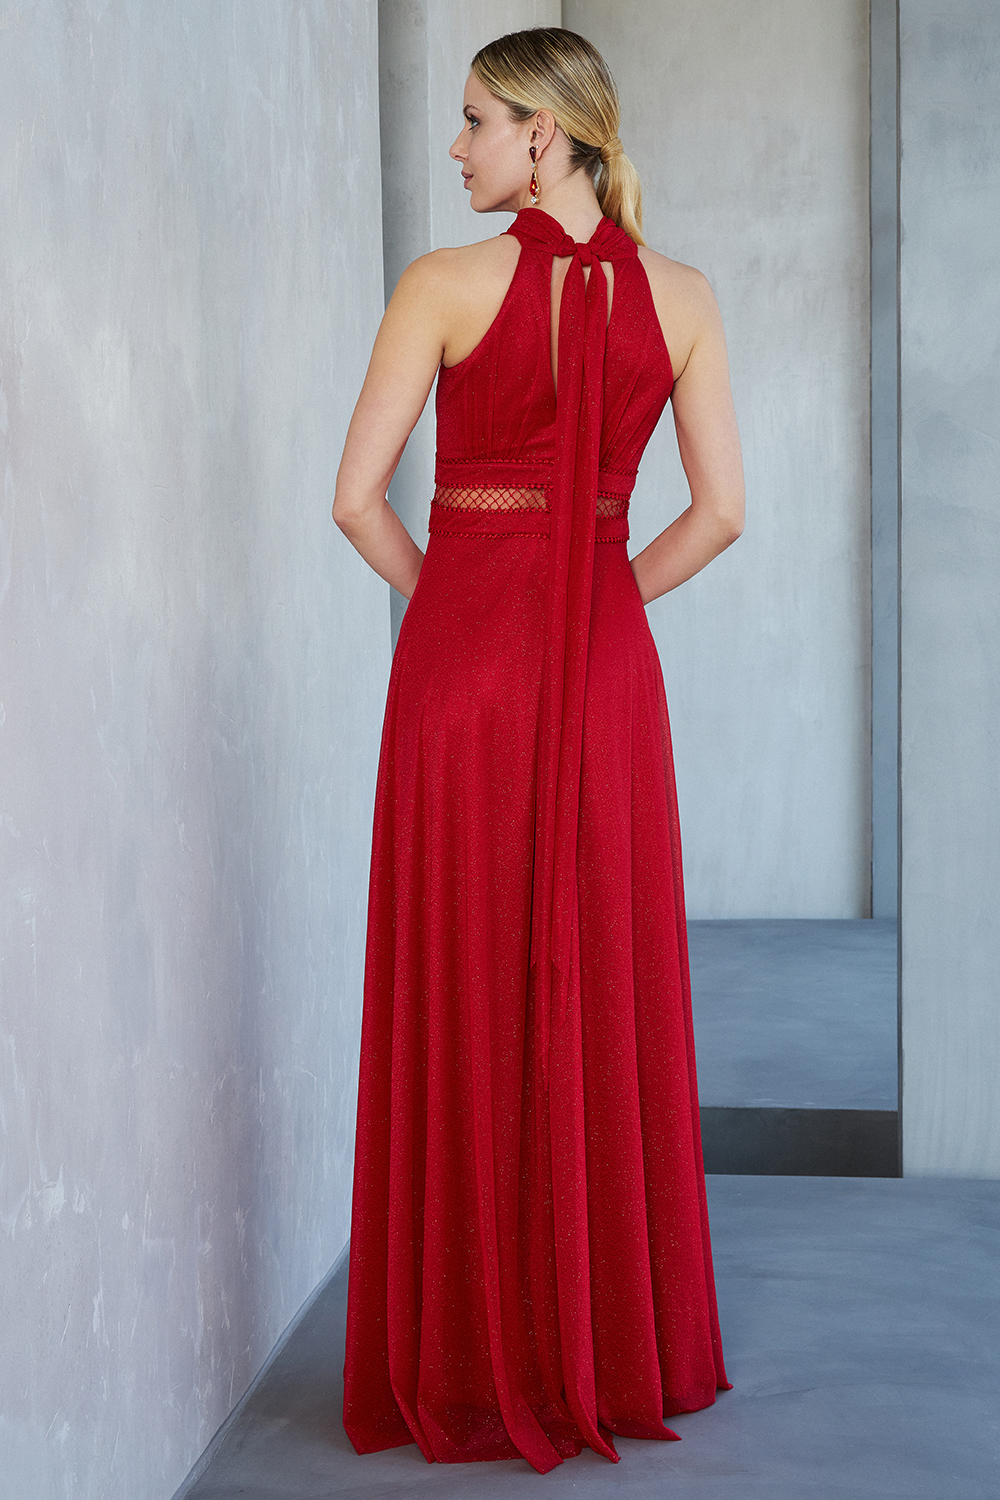 Long cocktail dress with shining fabric